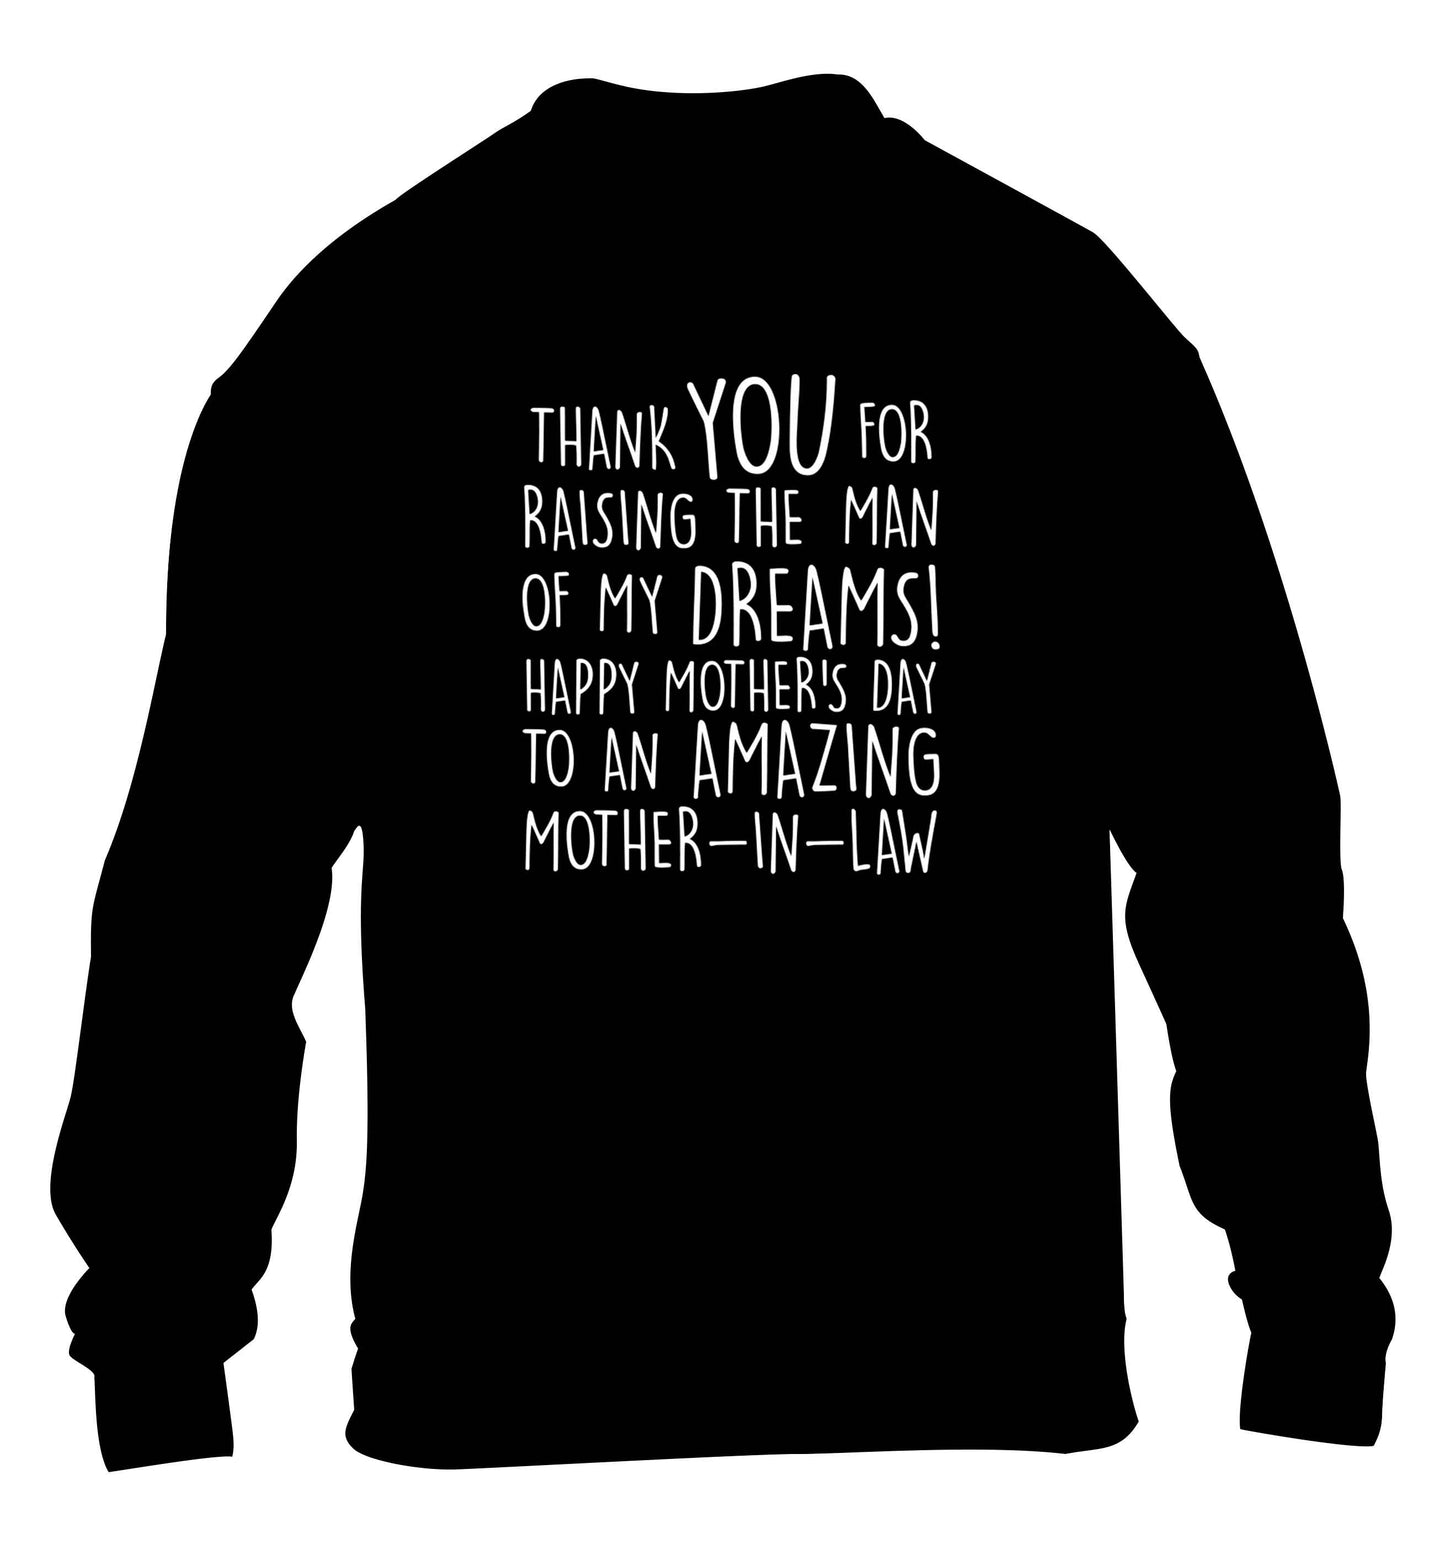 Raising the man of my dreams mother's day mother-in-law children's black sweater 12-13 Years